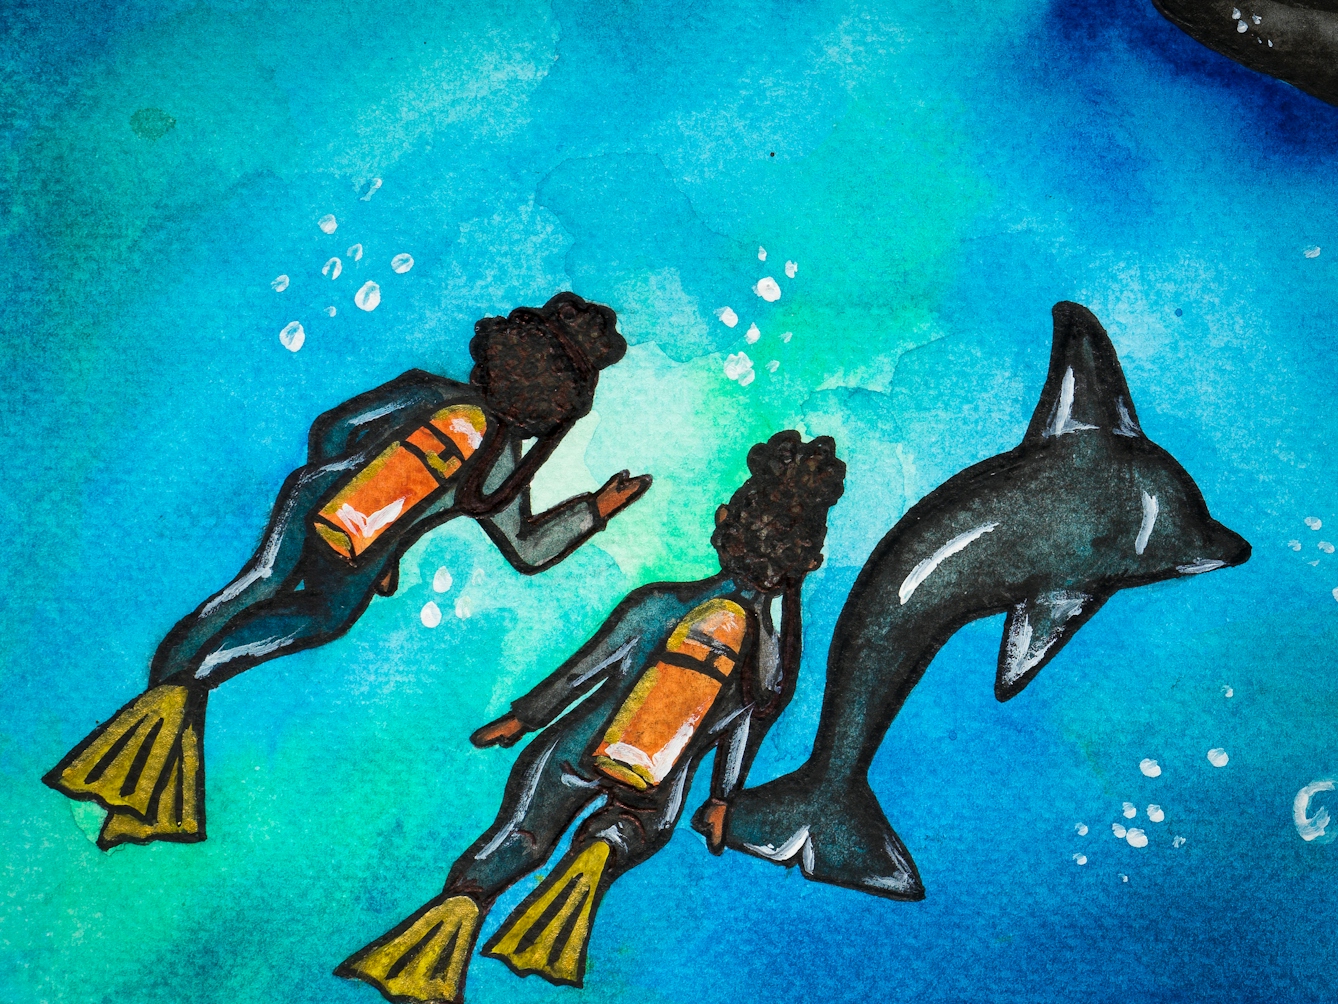 Detail from a larger colourful watercolour artwork.  The artwork shows an underwater scene. There are two figures with scuba diving equipment of flippers and oxygen tanks. There is a dolphin swimming alongside them. 